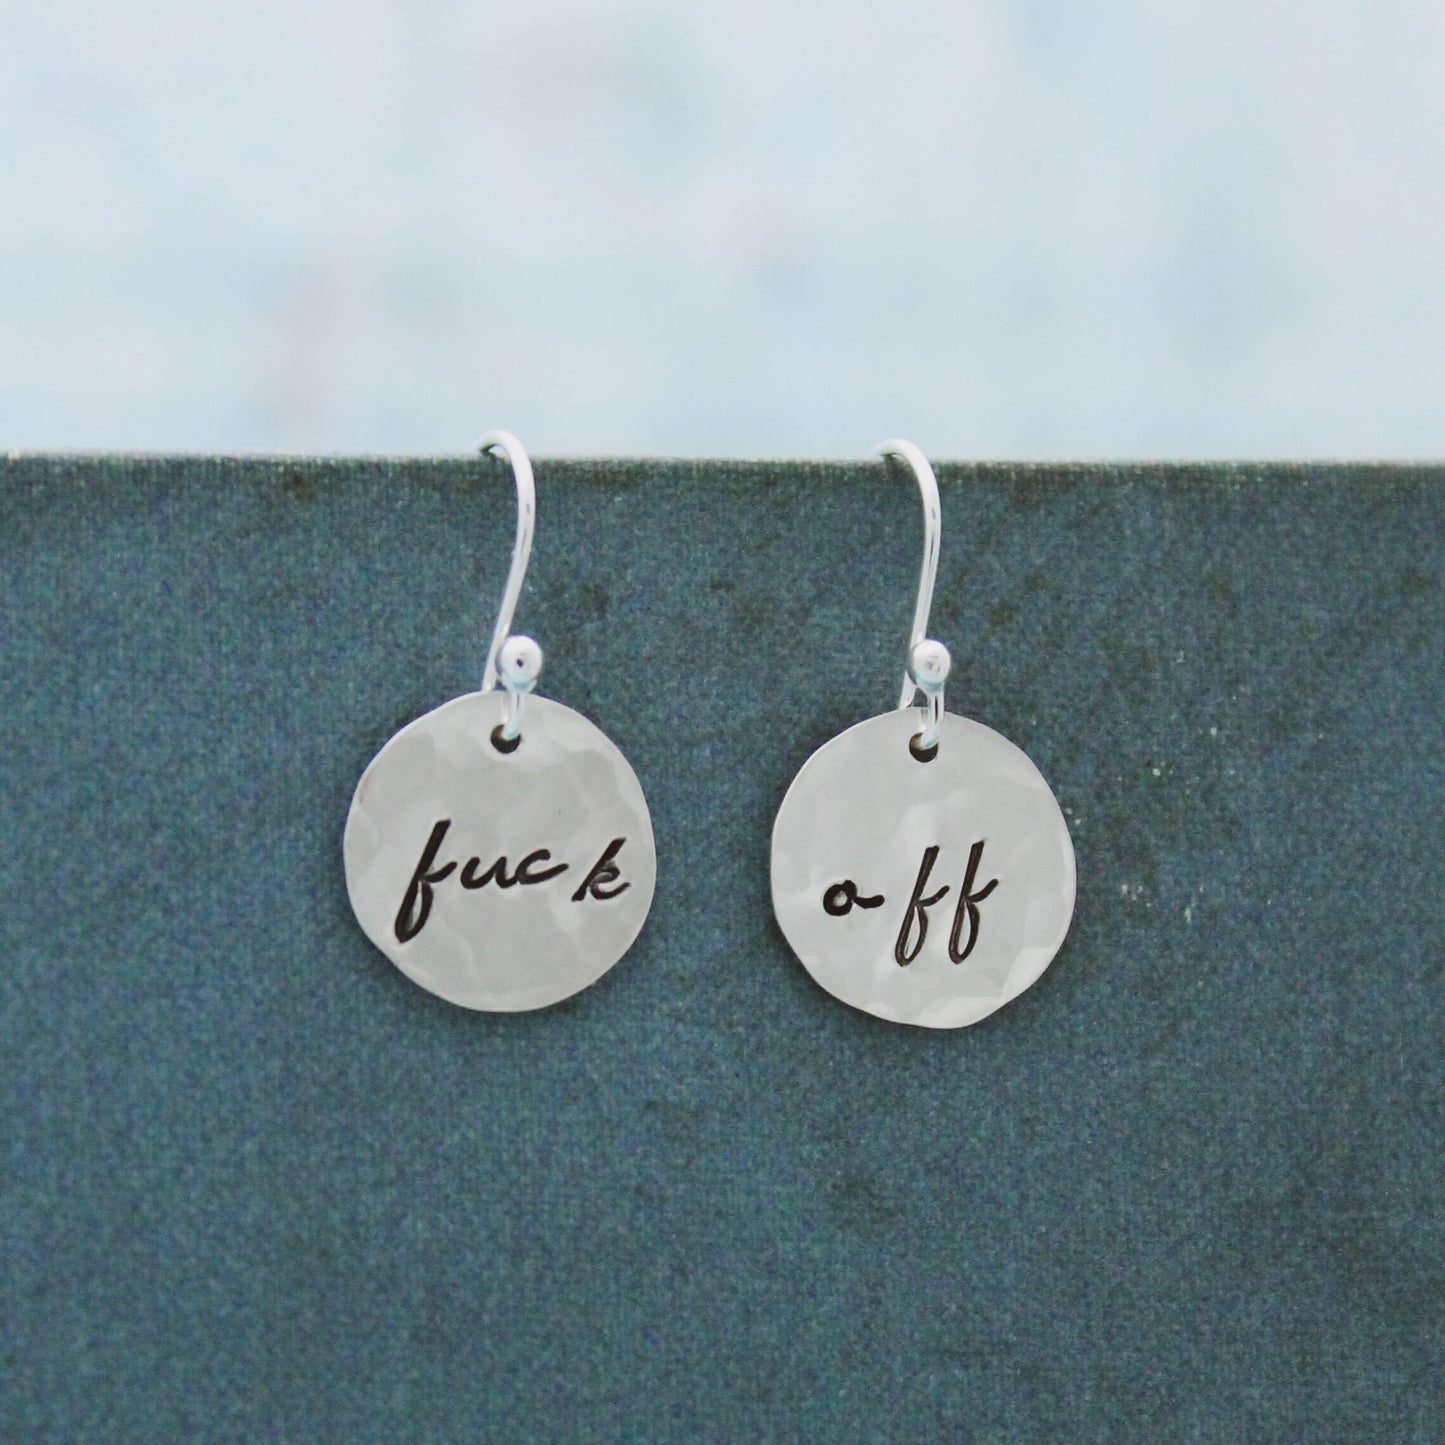 Fuck Off Sterling Silver Earrings, Fuck Jewelry,  Fuck Off Earrings, Fun Funky Fuck Jewelry Expletive Gift for Her, Whimsigoth